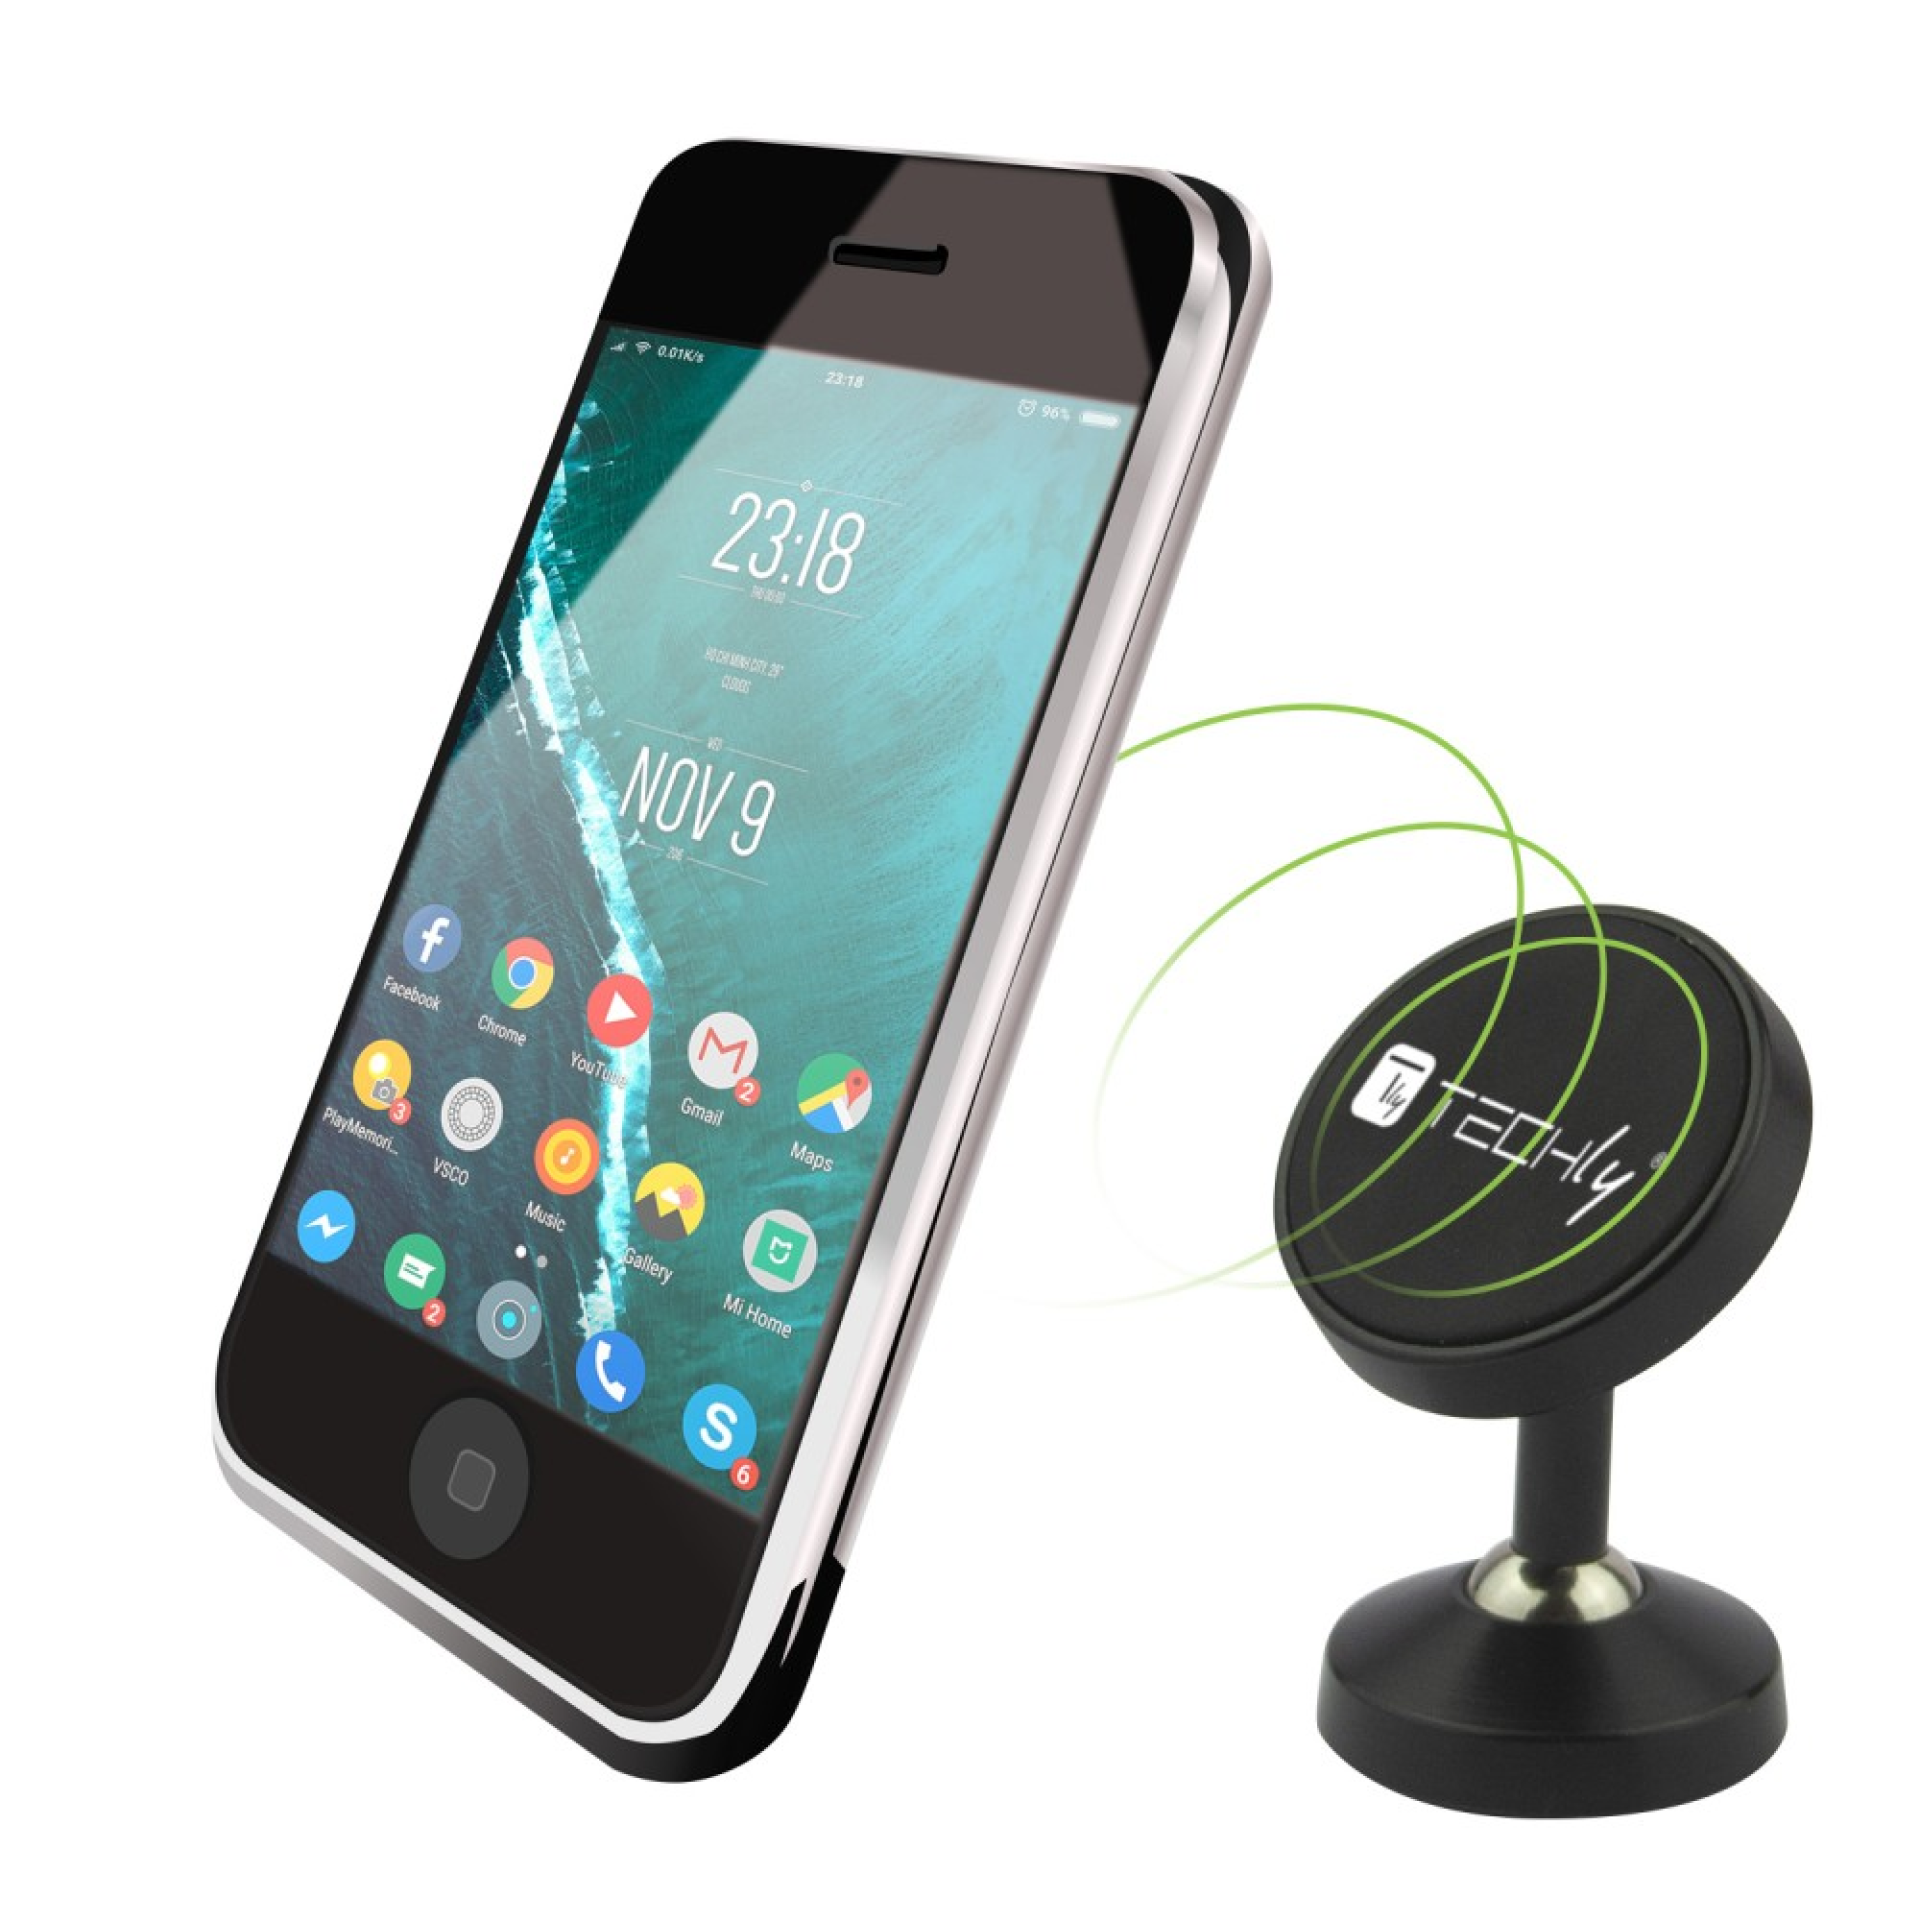 Techly smartphone holder, 360° metal joint, magnetic